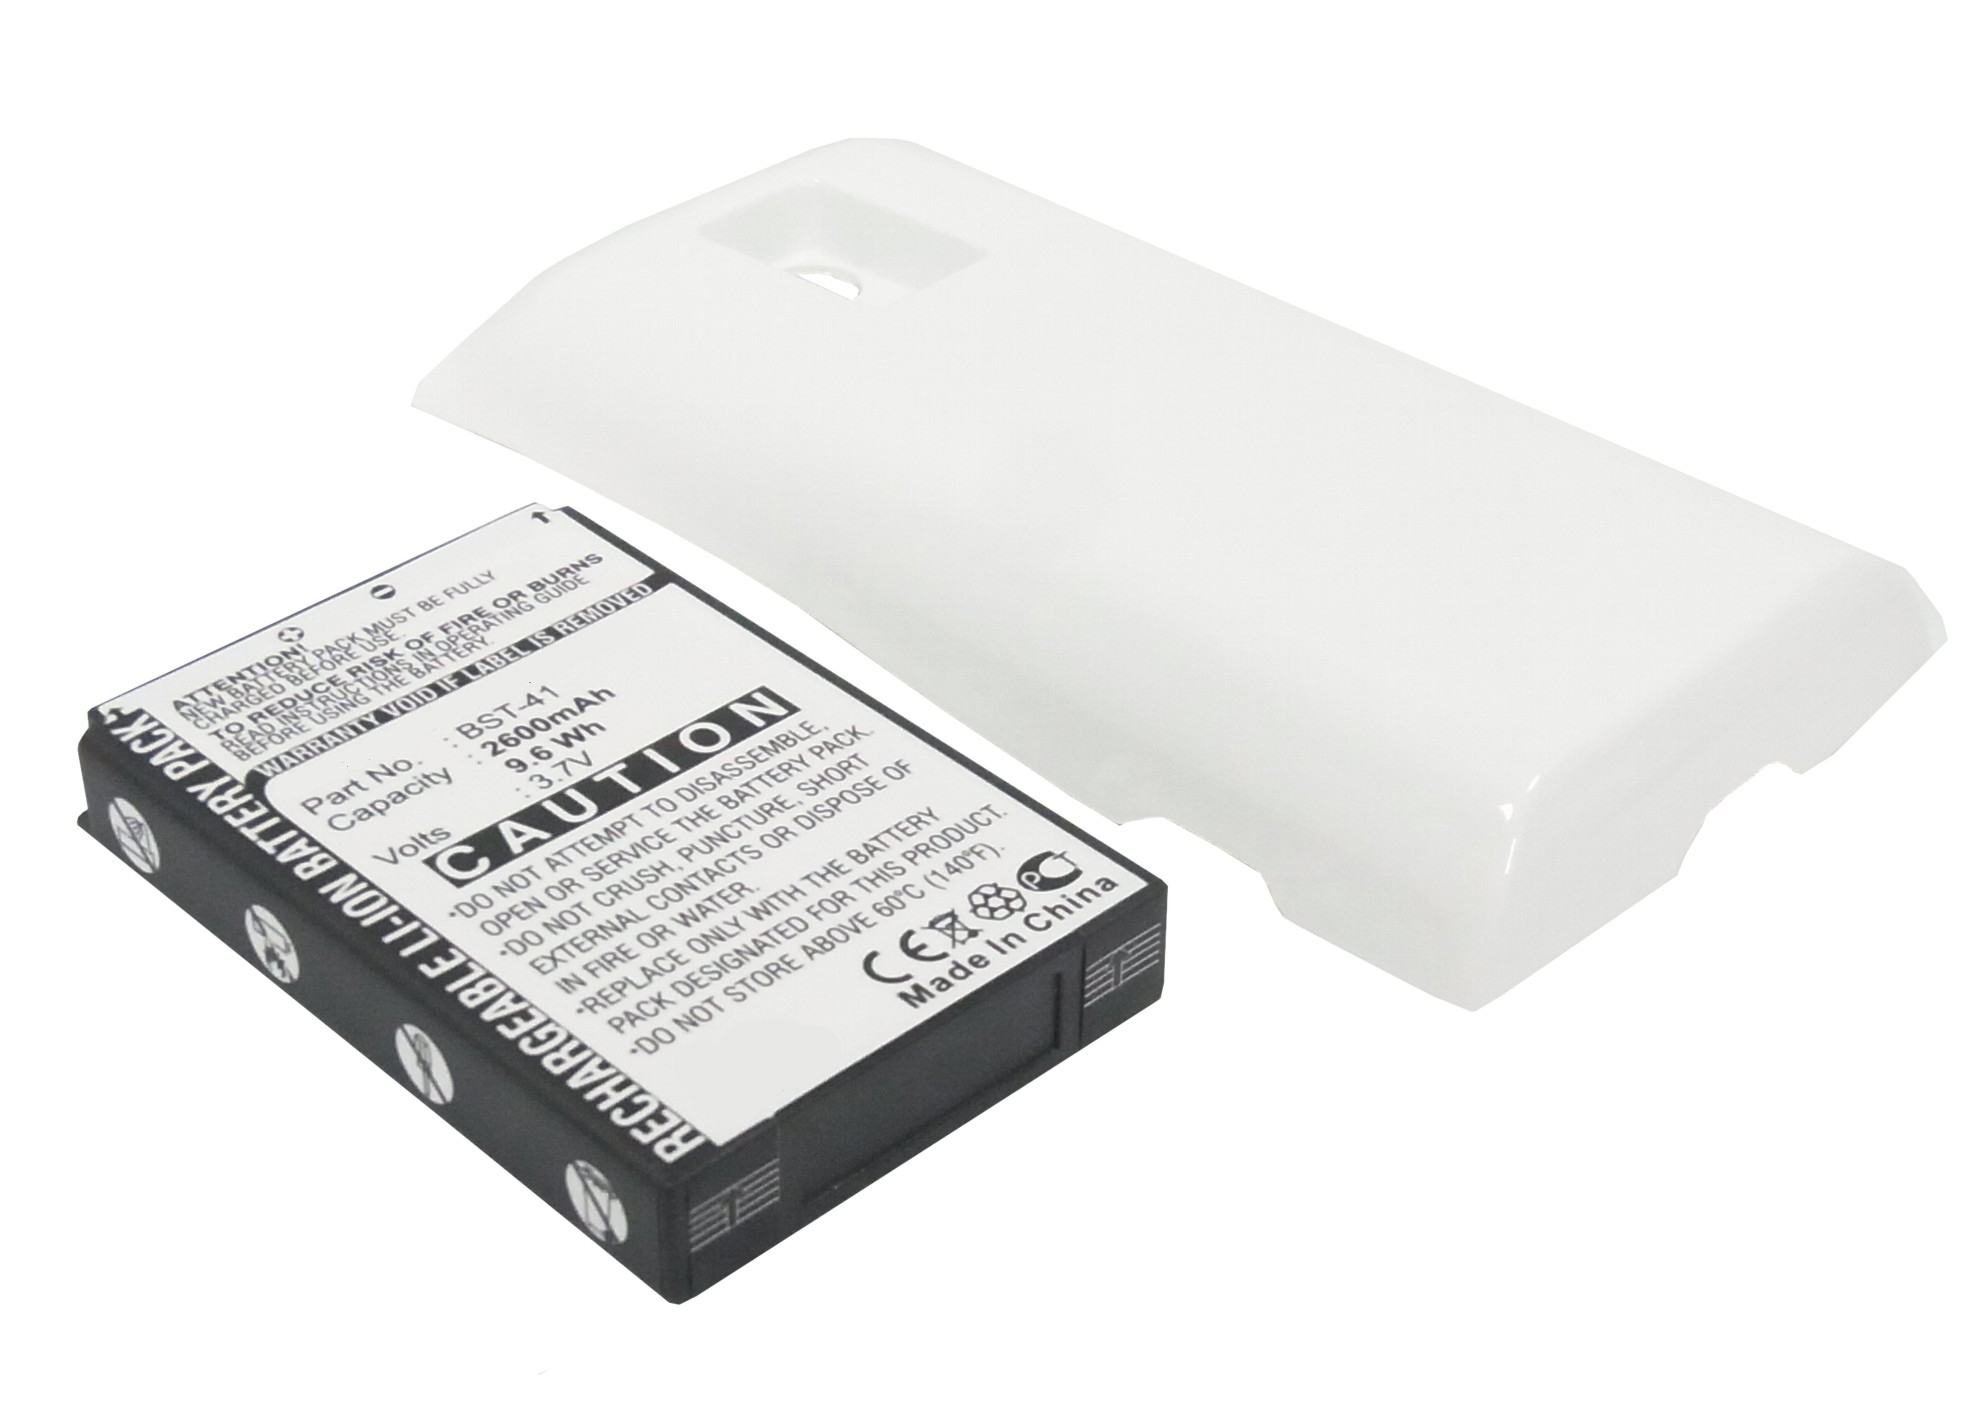 Synergy Digital Cell Phone Battery, Compatiable with NTT Docomo SO04 Cell Phone Battery (3.7V, Li-ion, 2600mAh)